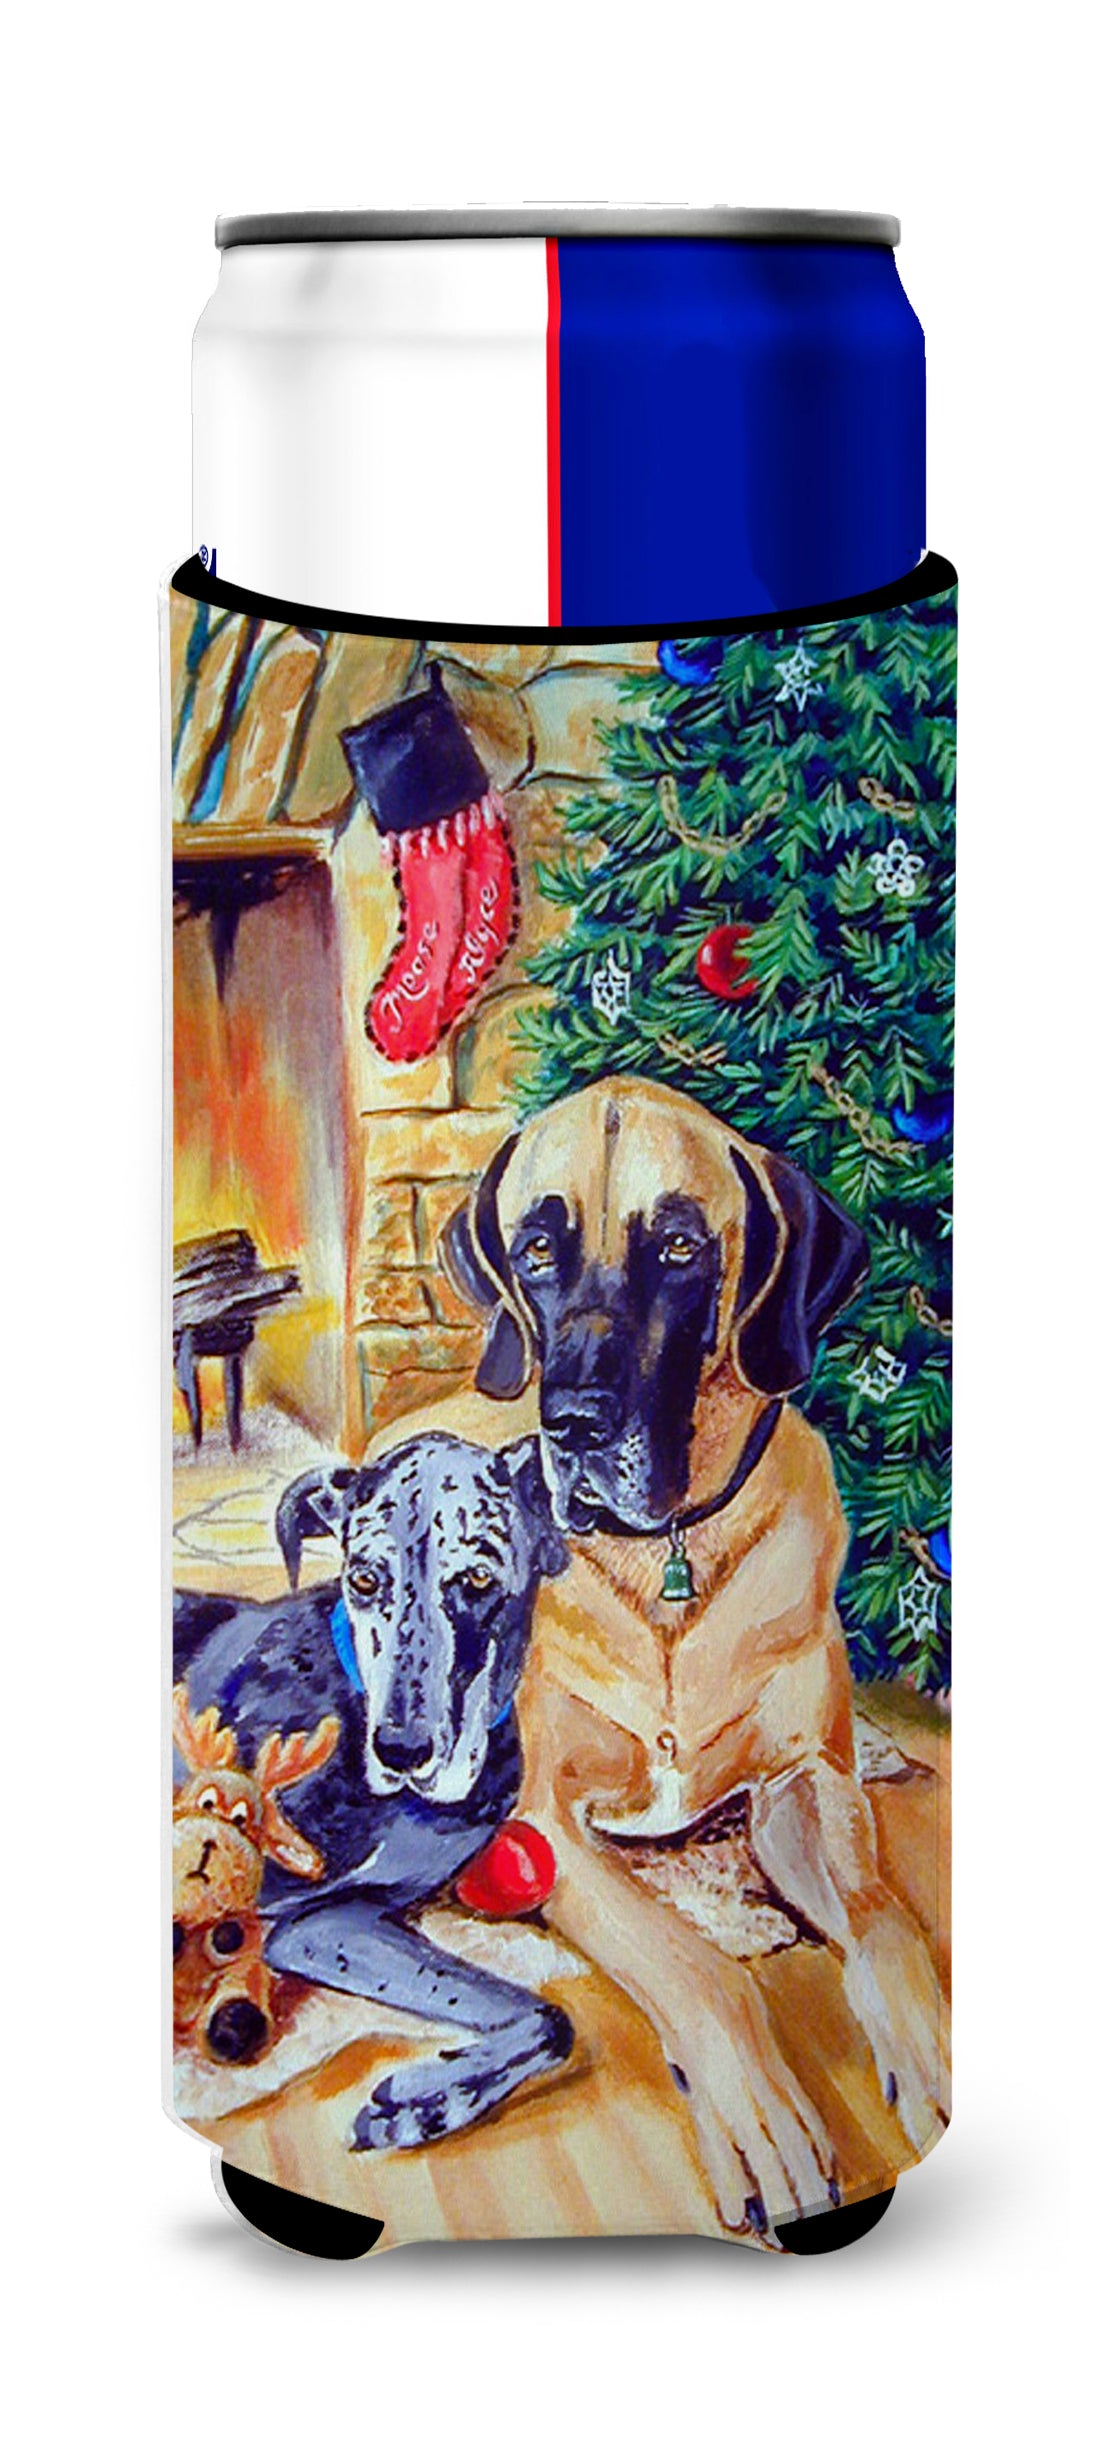 Fawn and Blue Great Dane waiting on Christmas Ultra Beverage Insulators for slim cans 7111MUK